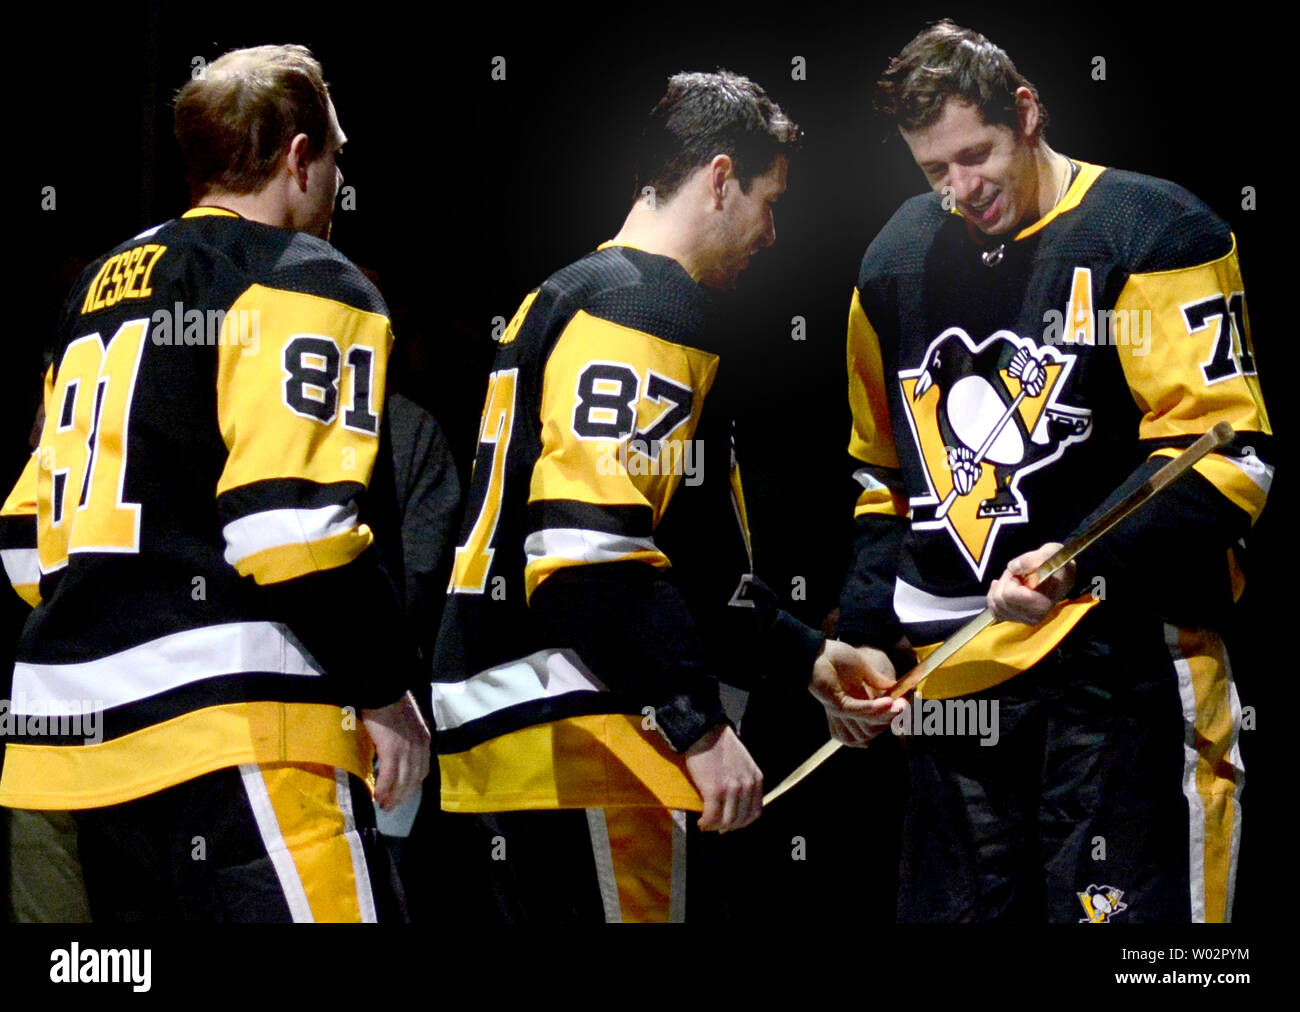 Pittsburgh Penguins center Sidney Crosby (87) presents Pittsburgh Penguins center Evgeni Malkin (71) presents the stick from his 1000 point game before the start of the St. Louis Blues 5-1 win at PPG Paints Arena in Pittsburgh on March 16, 2018.   Photo by Archie Carpenter/UPI Stock Photo